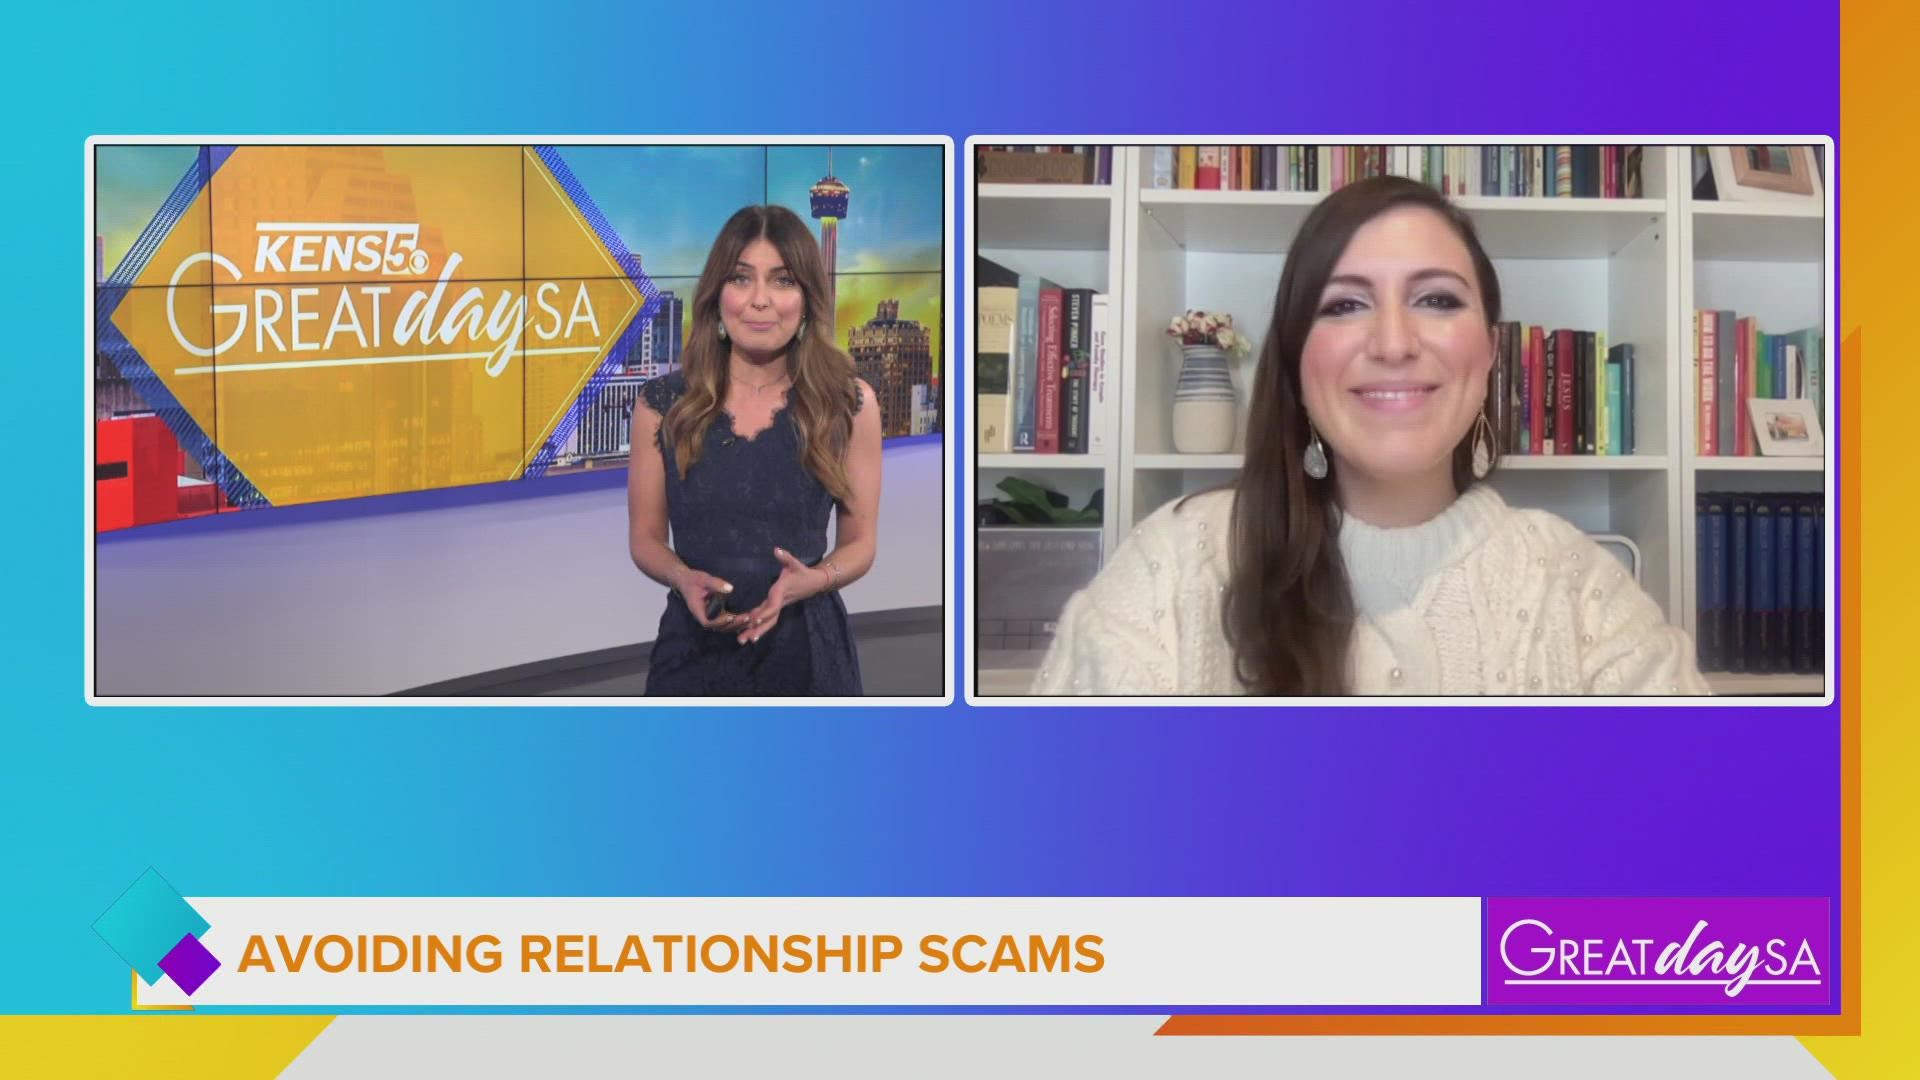 Christie Kederian, Relationship Expert, shares tips to avoid online dating scams